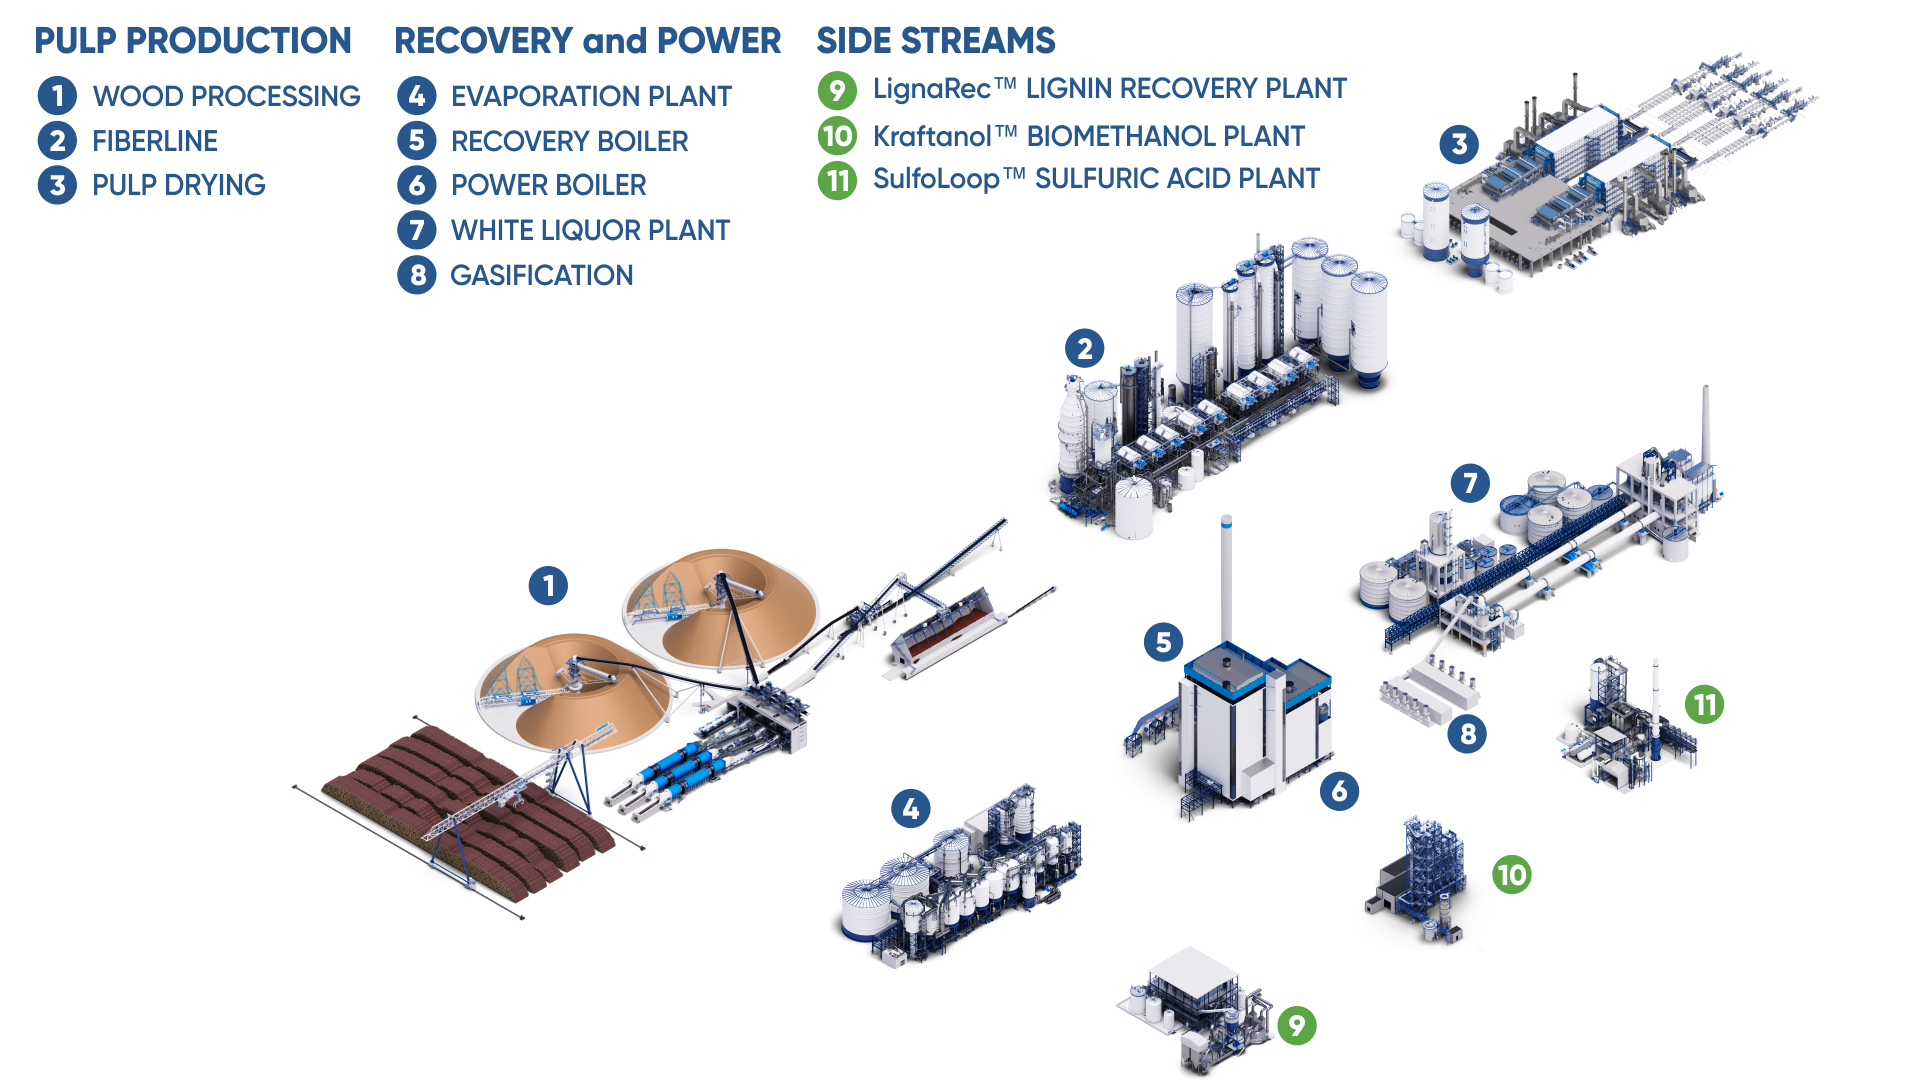 Drawing of a pulp mill, with labeled component technologies and processes